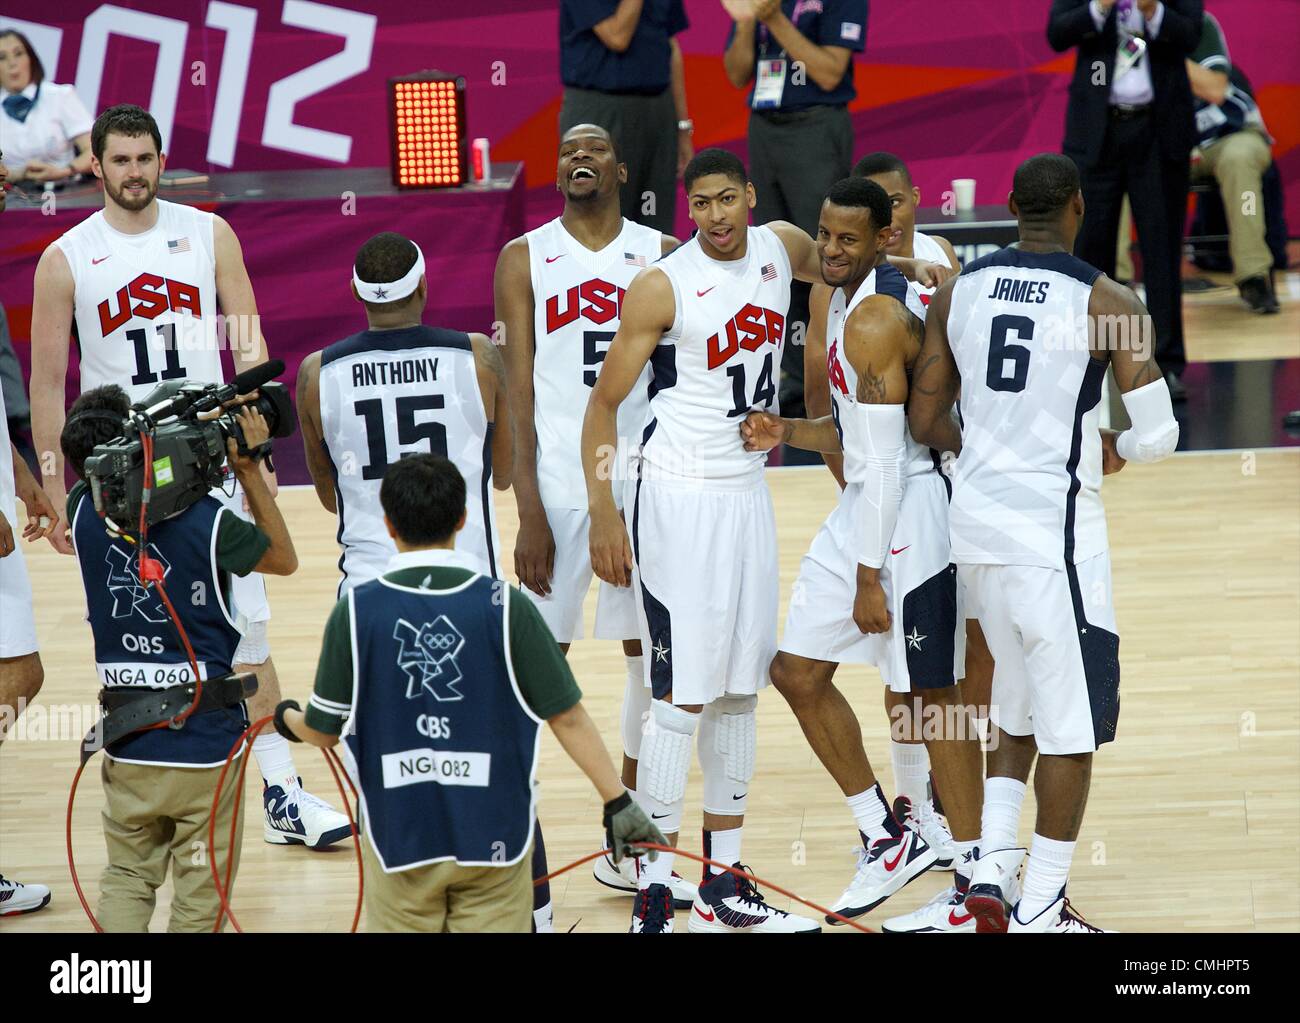 London 2012 Olympics: USA 'Dream Team' retain gold medal with